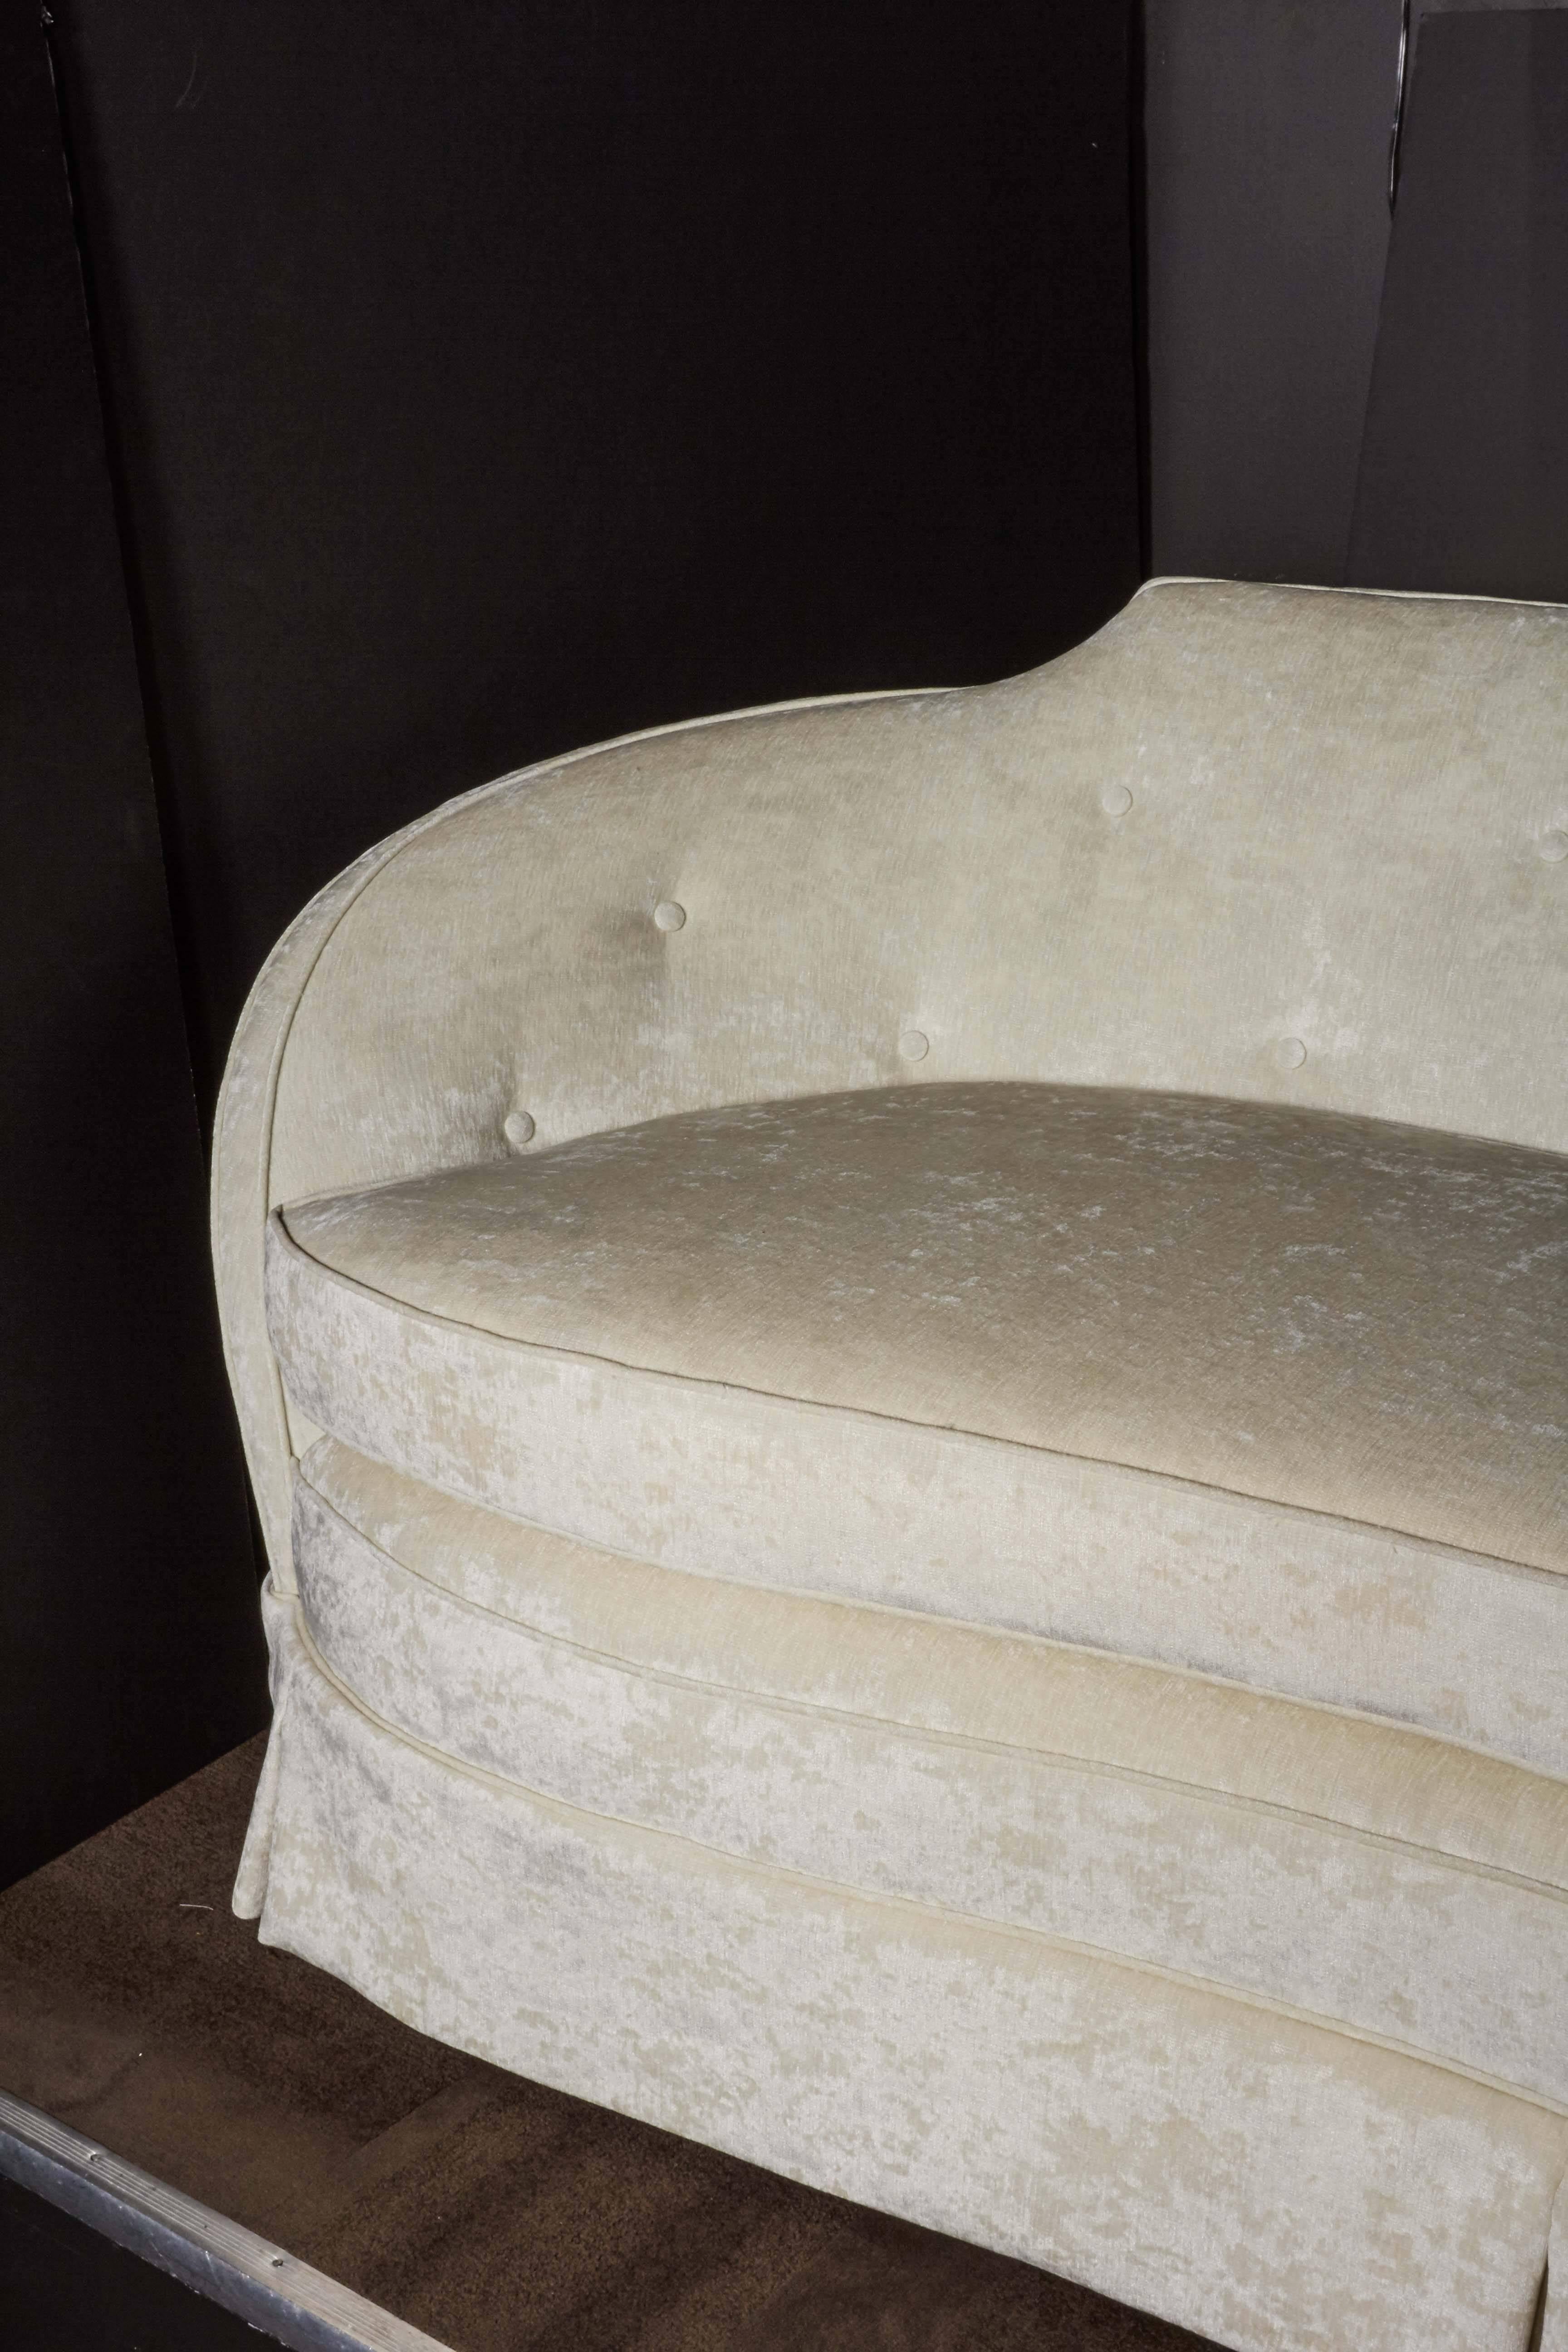 Striking Hollywood era sofa with stylized curved back/arm design. Newly reupholstered in a rich creme velvet by Castel, featuring button back details and dust ruffle. Comfortably sits up to four people.